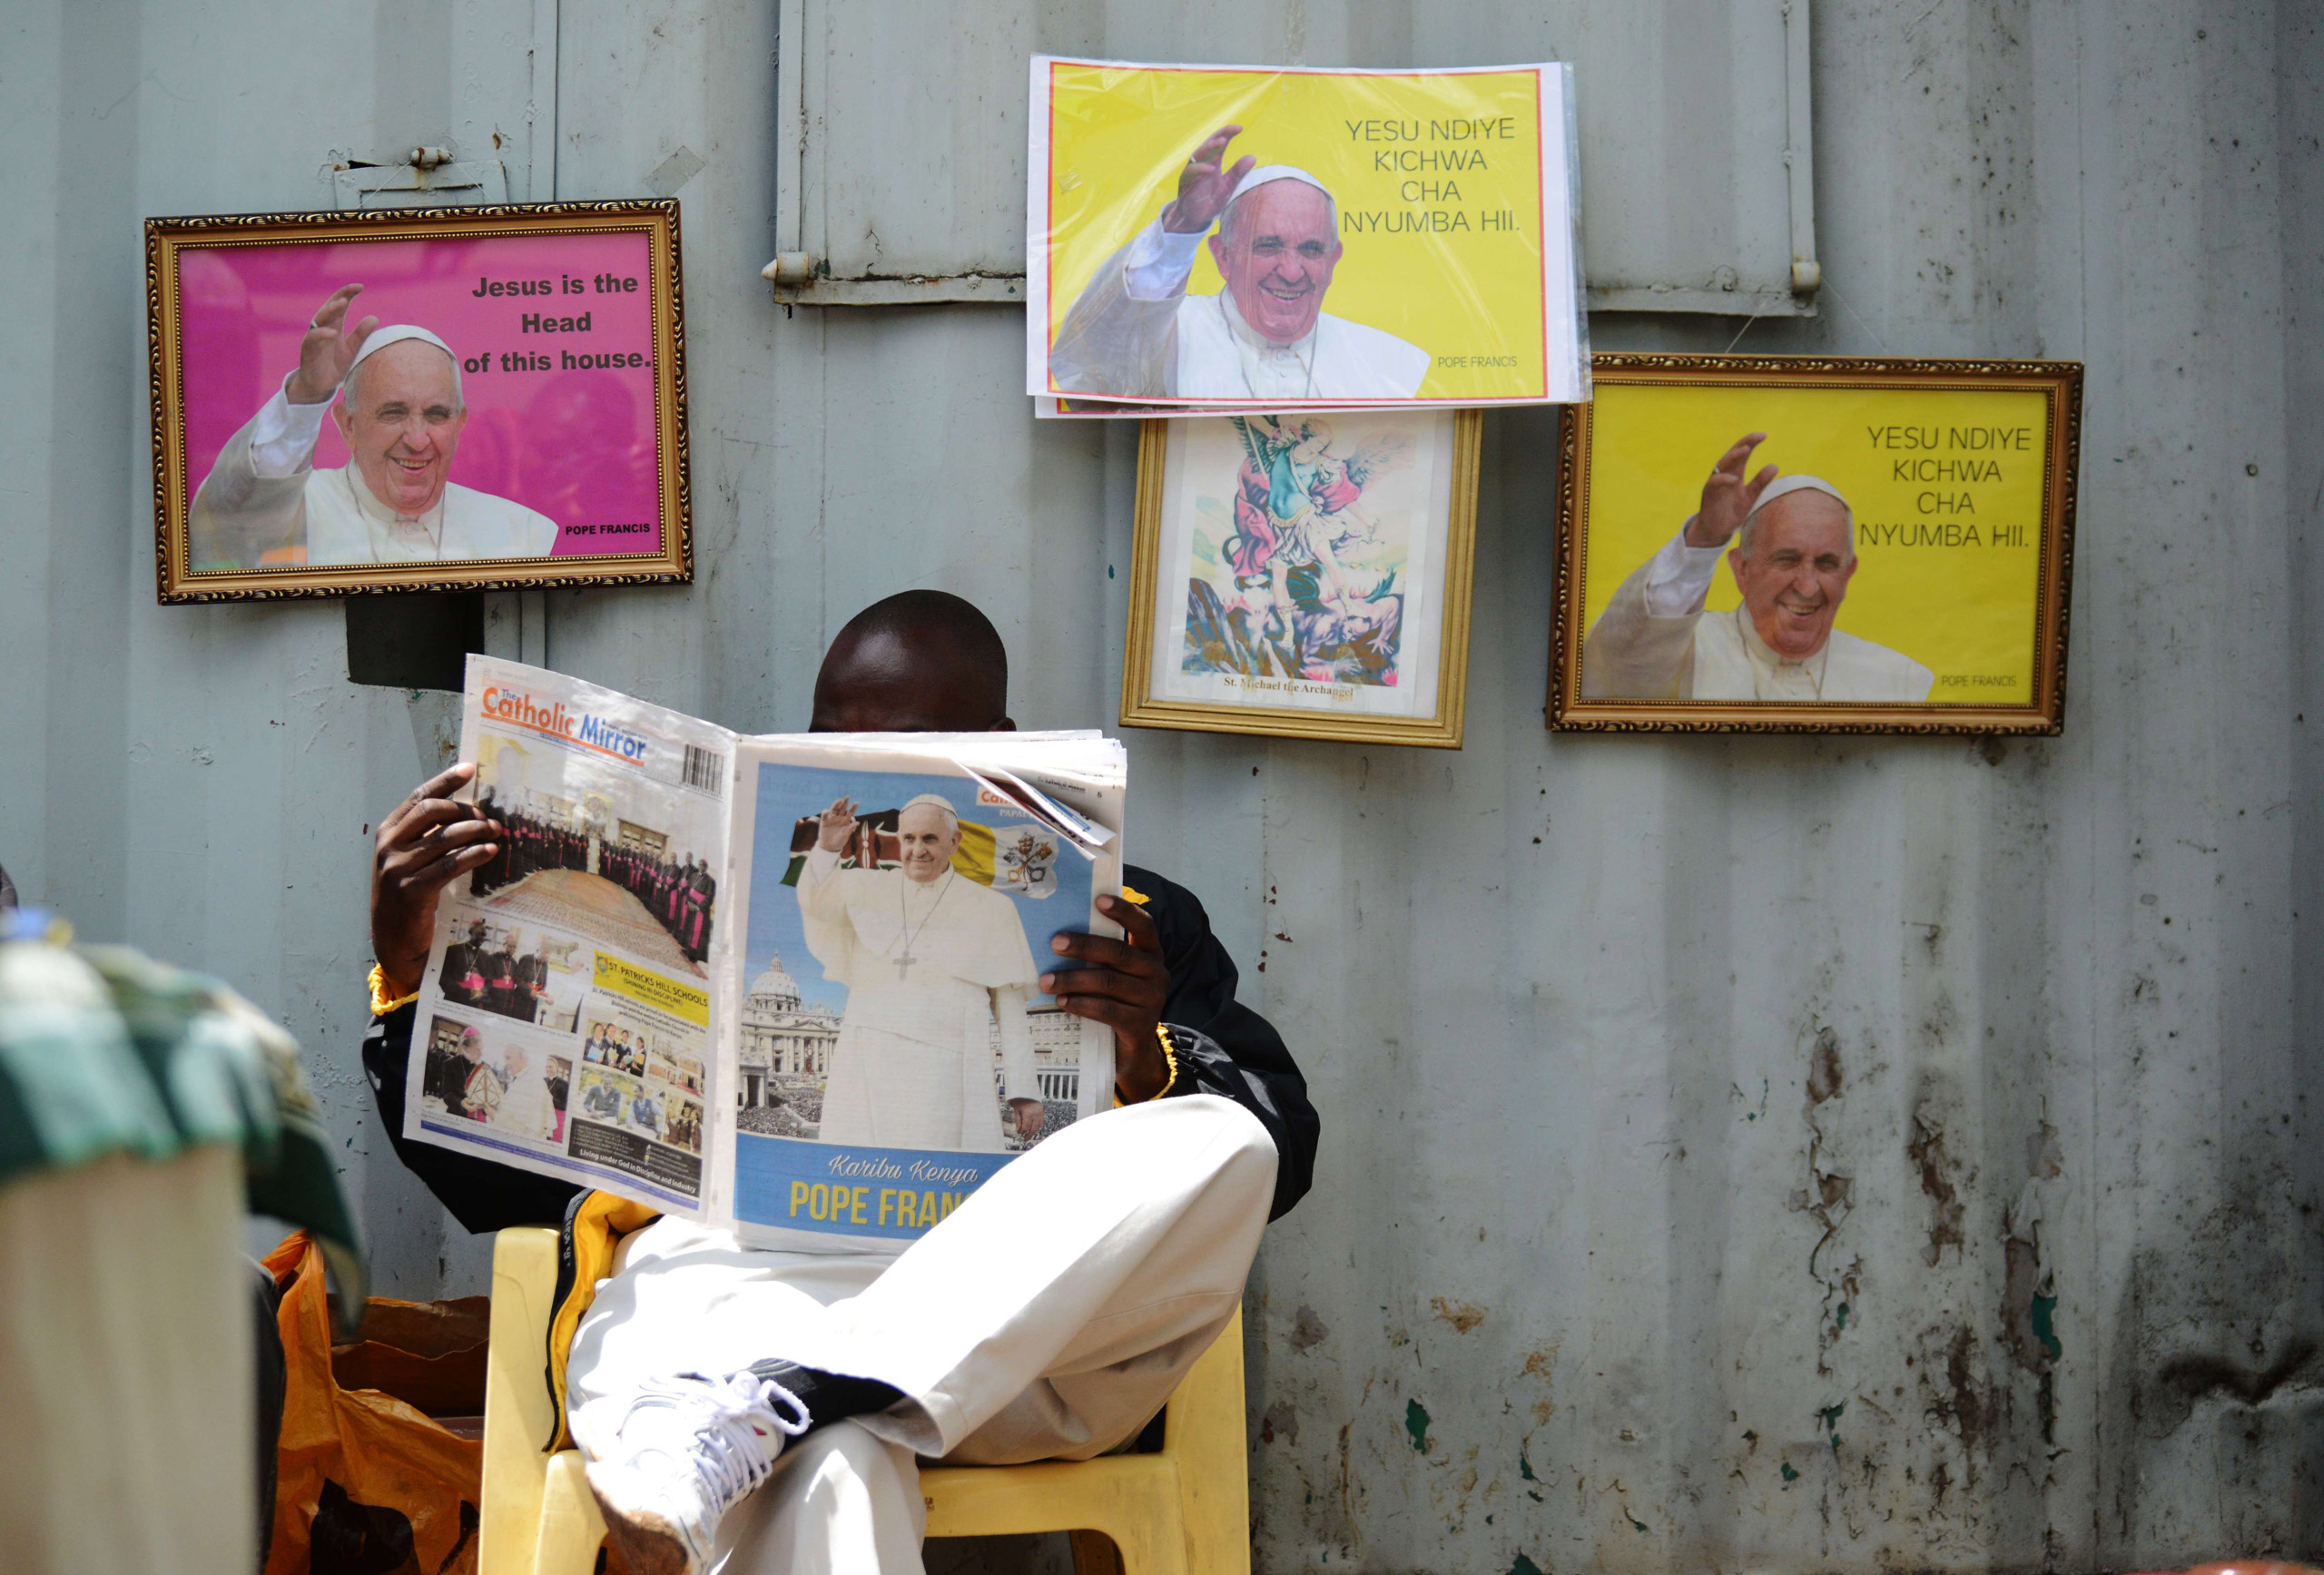 A man reads a copy of the  Catholic Mirror  newspaper next to pictures of Pope Francis at the Holy Family Basilica in Nairobi on Nov. 22, 2015.